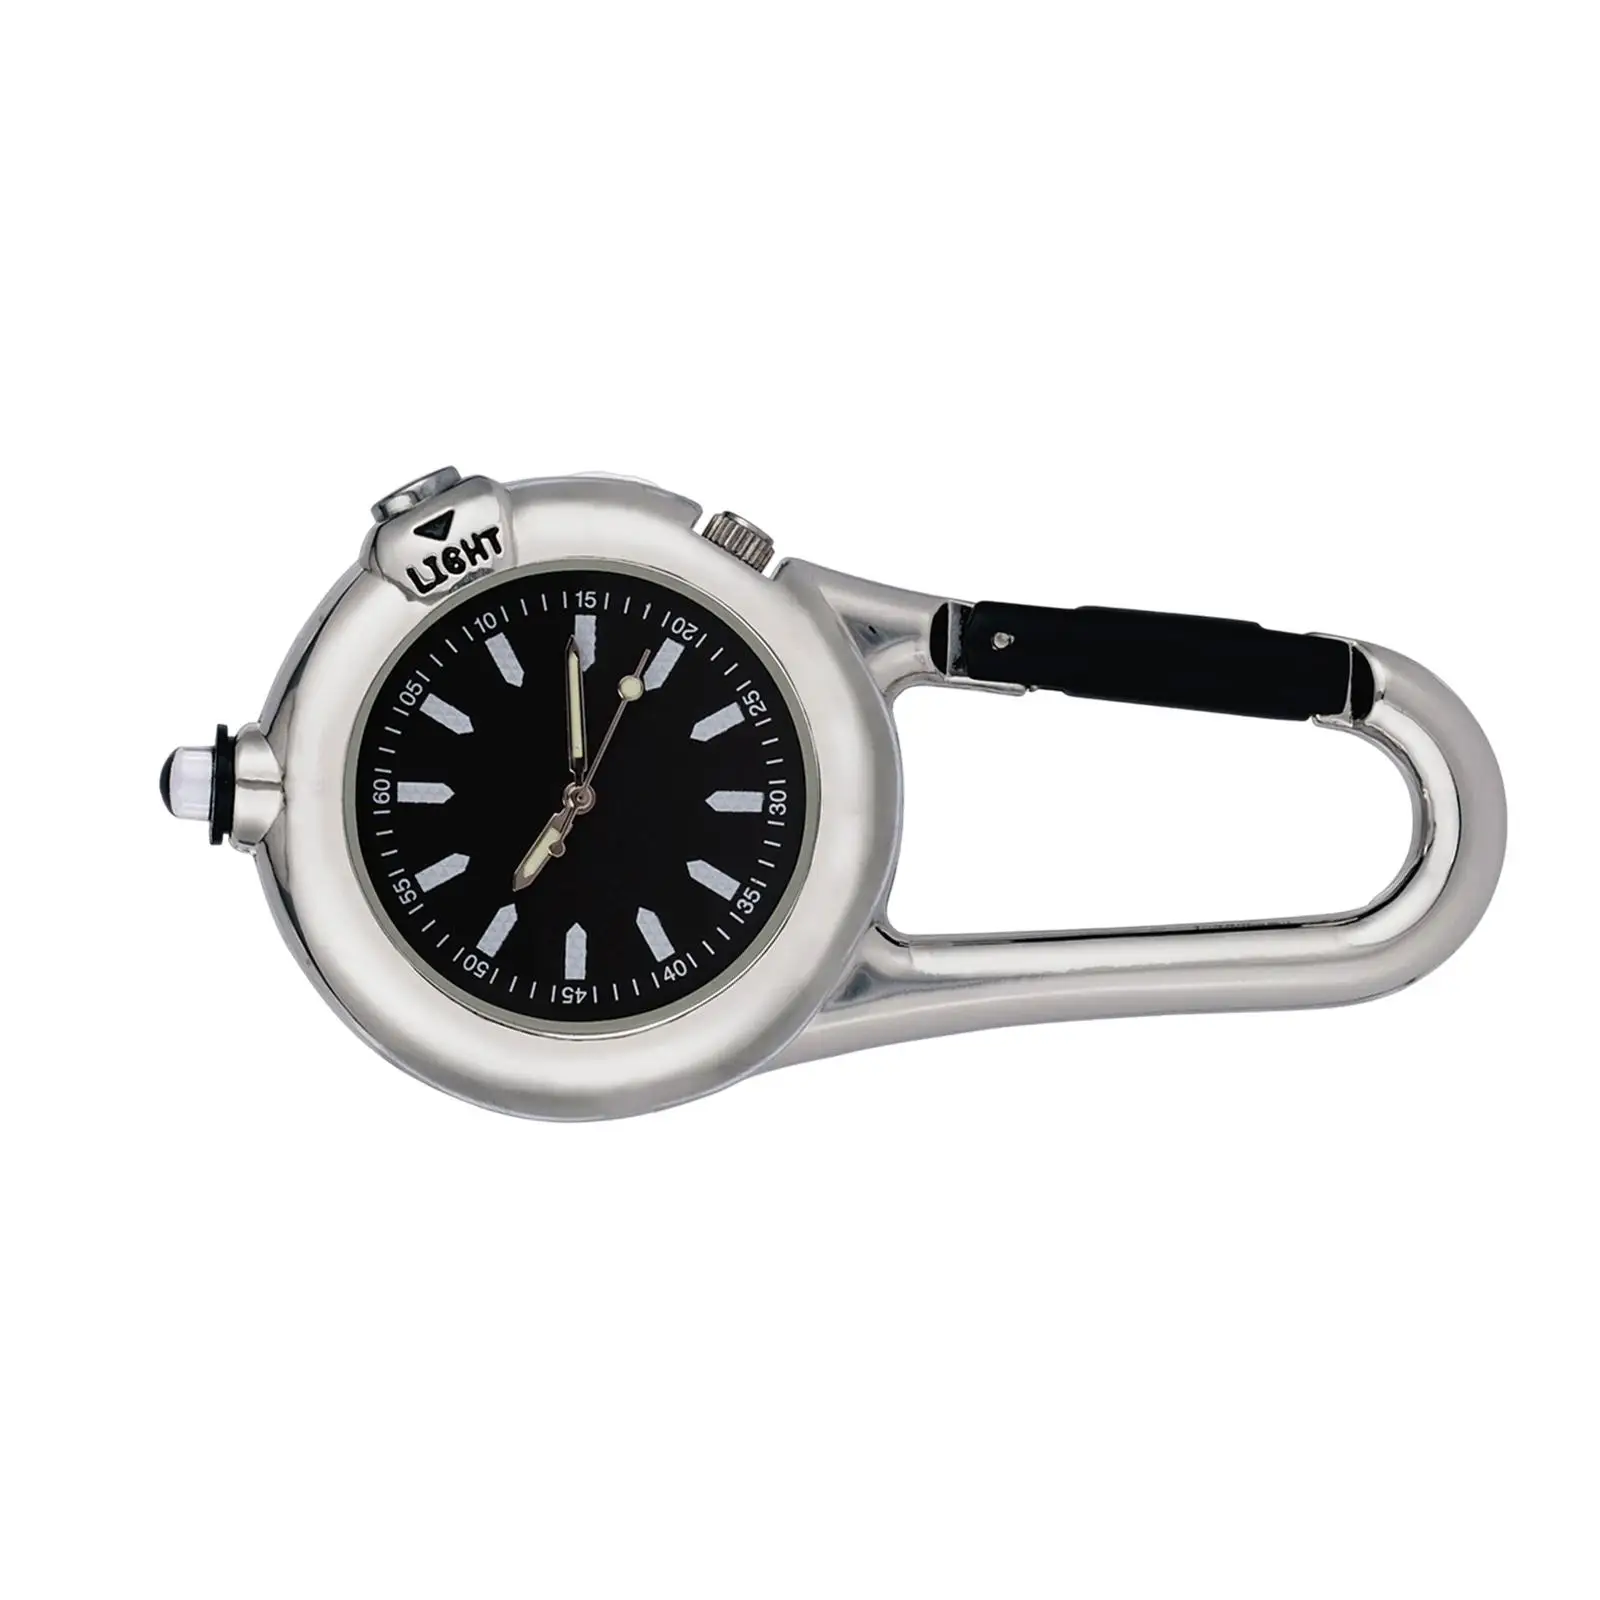 Mini Clip On Carabiner Pocket Watch Men Women Backpack Watch Climbing Watch for Outdoor Hiking Office Camping Accessories